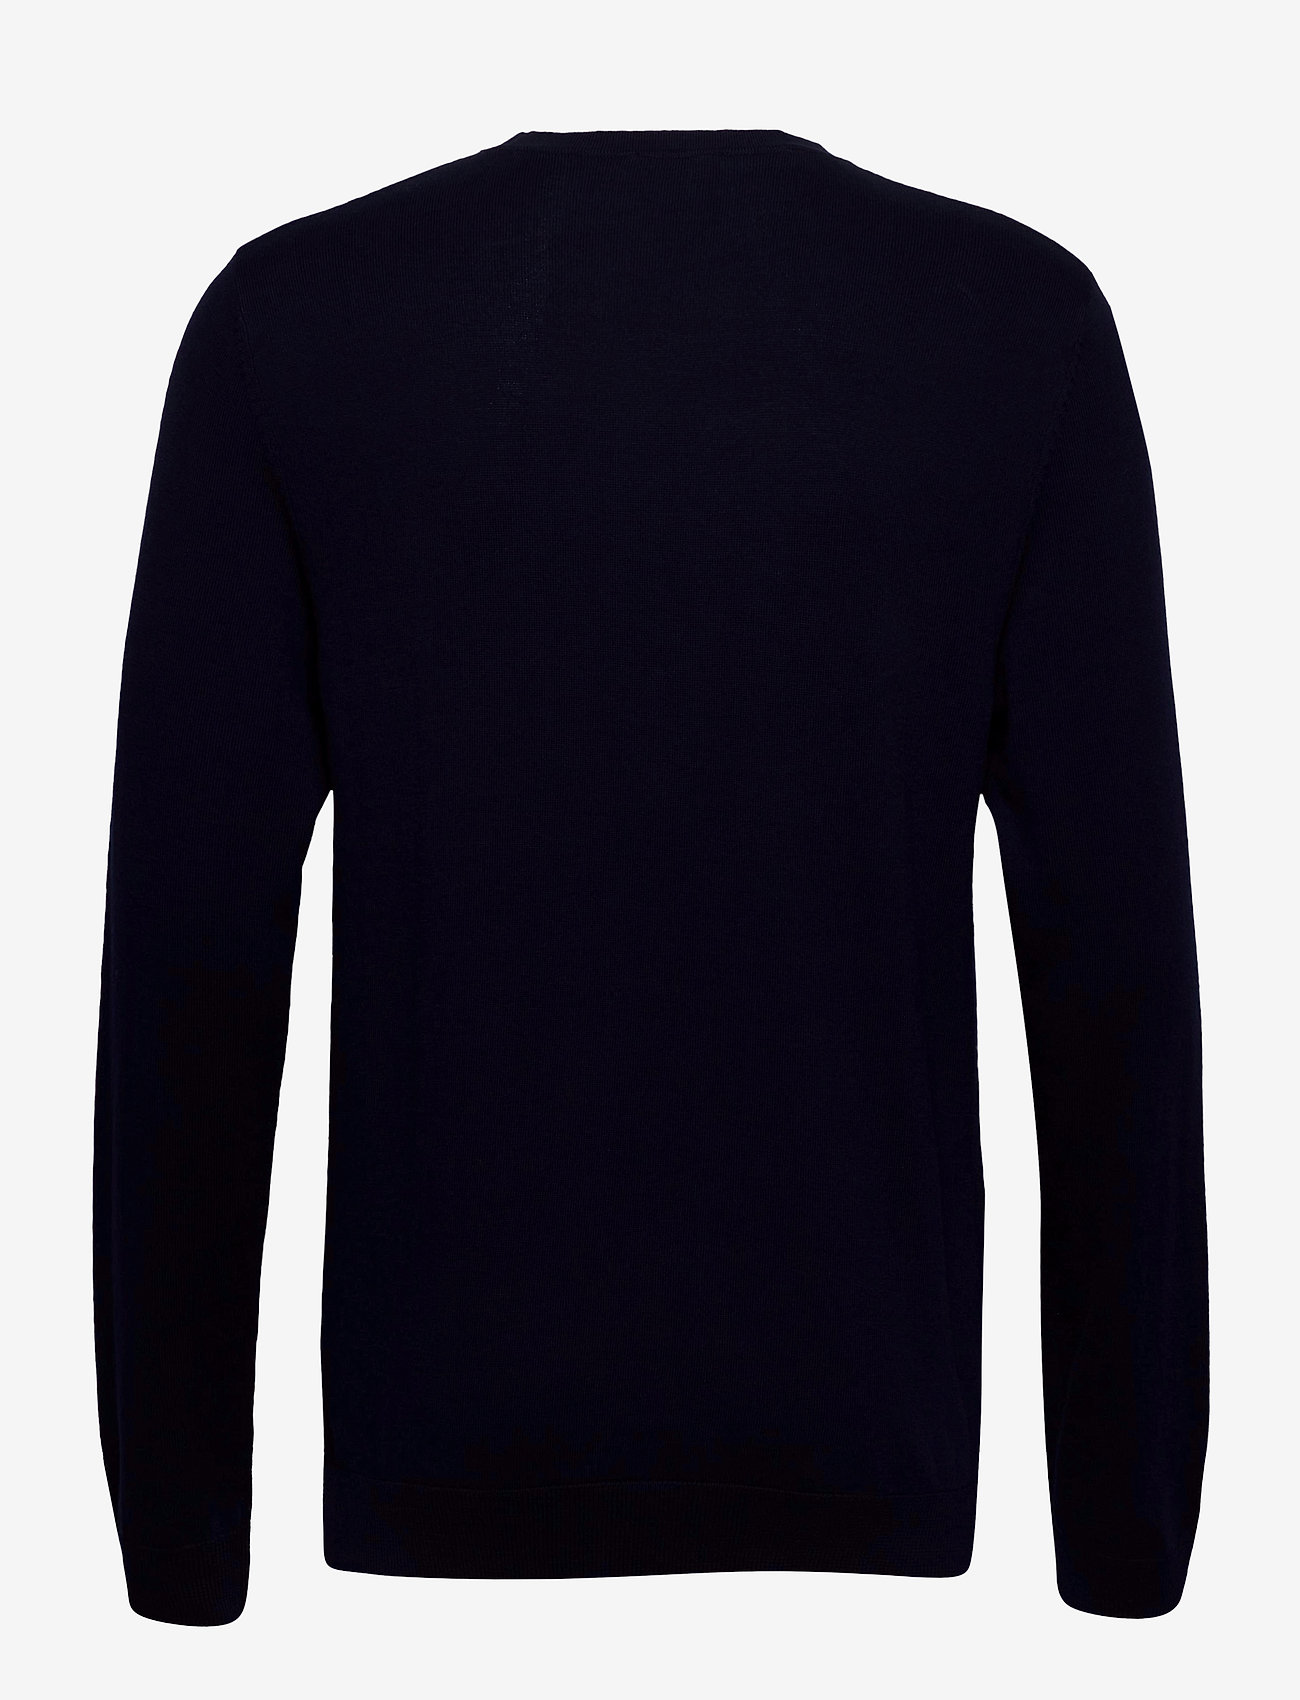 Selected Homme - SLHBERG CREW NECK NOOS - basic knitwear - navy blazer - 1